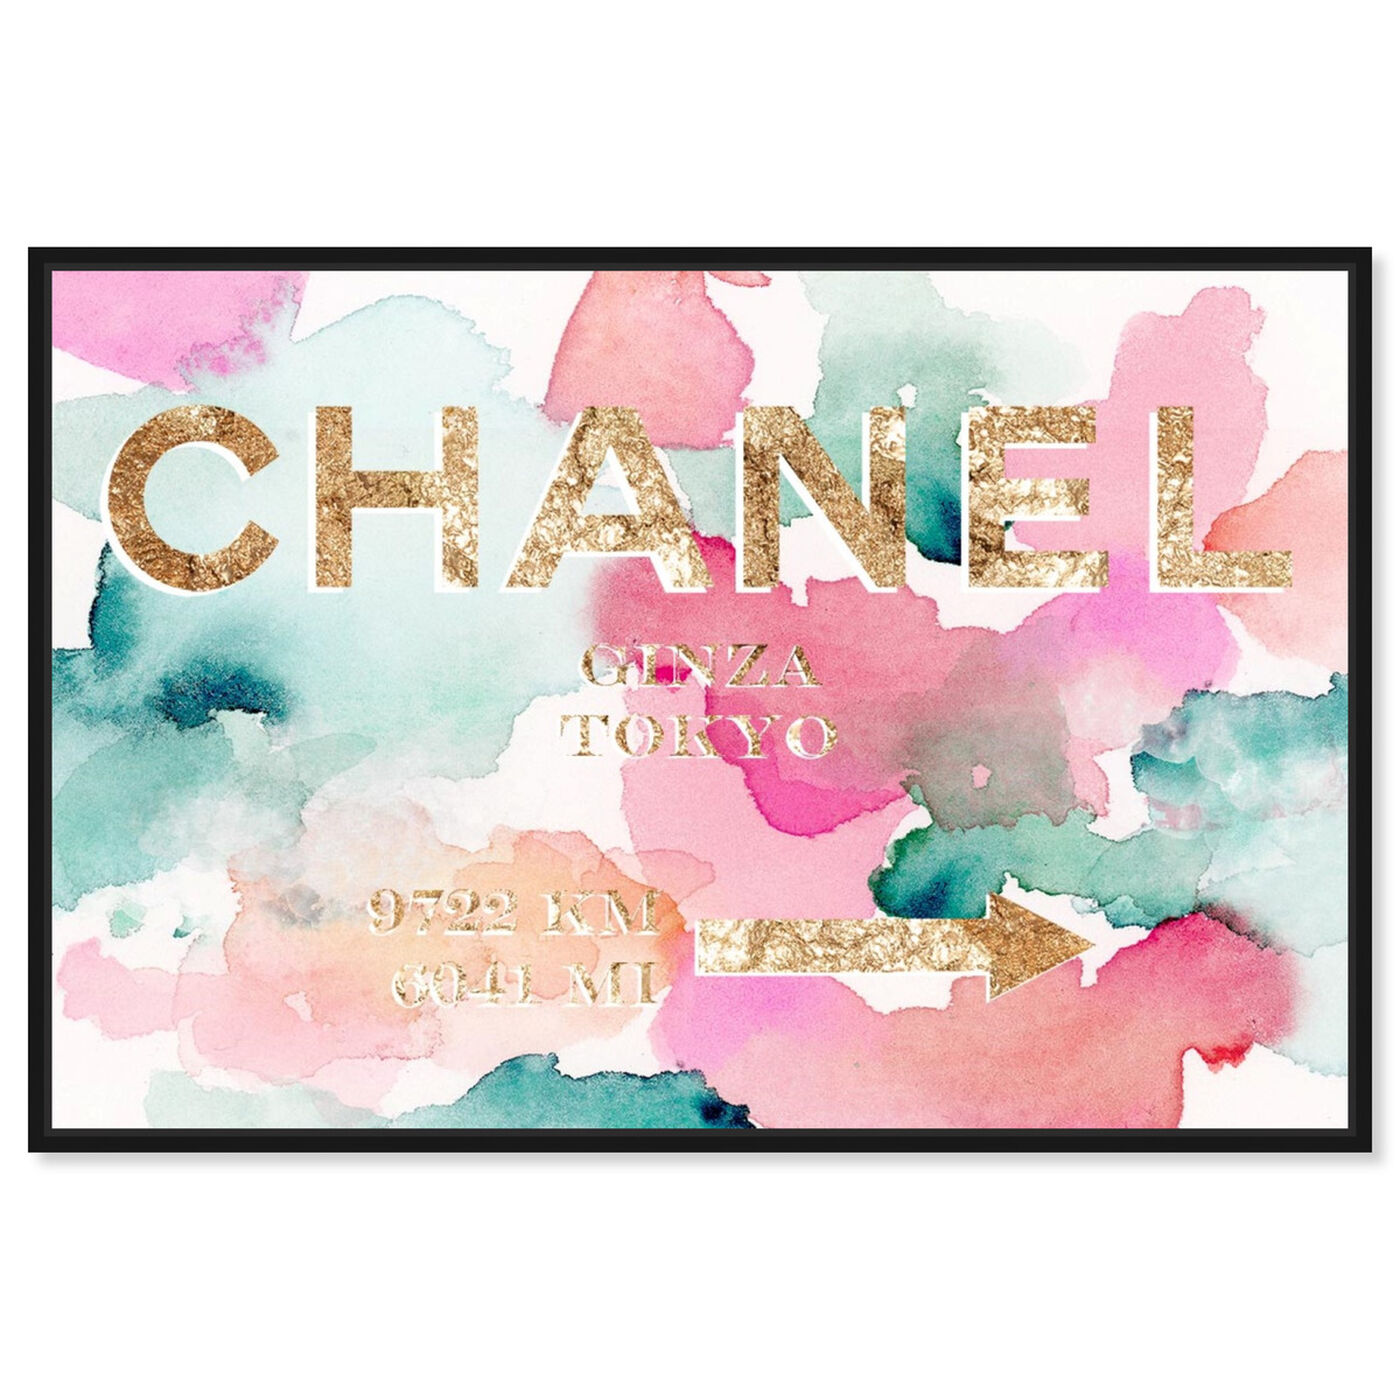 The Oliver Gal Artist Co 45 x 30 Gold Fashion and Glam Wall Art Canvas Prints Couture Road Sign Rococo Blush Home Décor Pink 